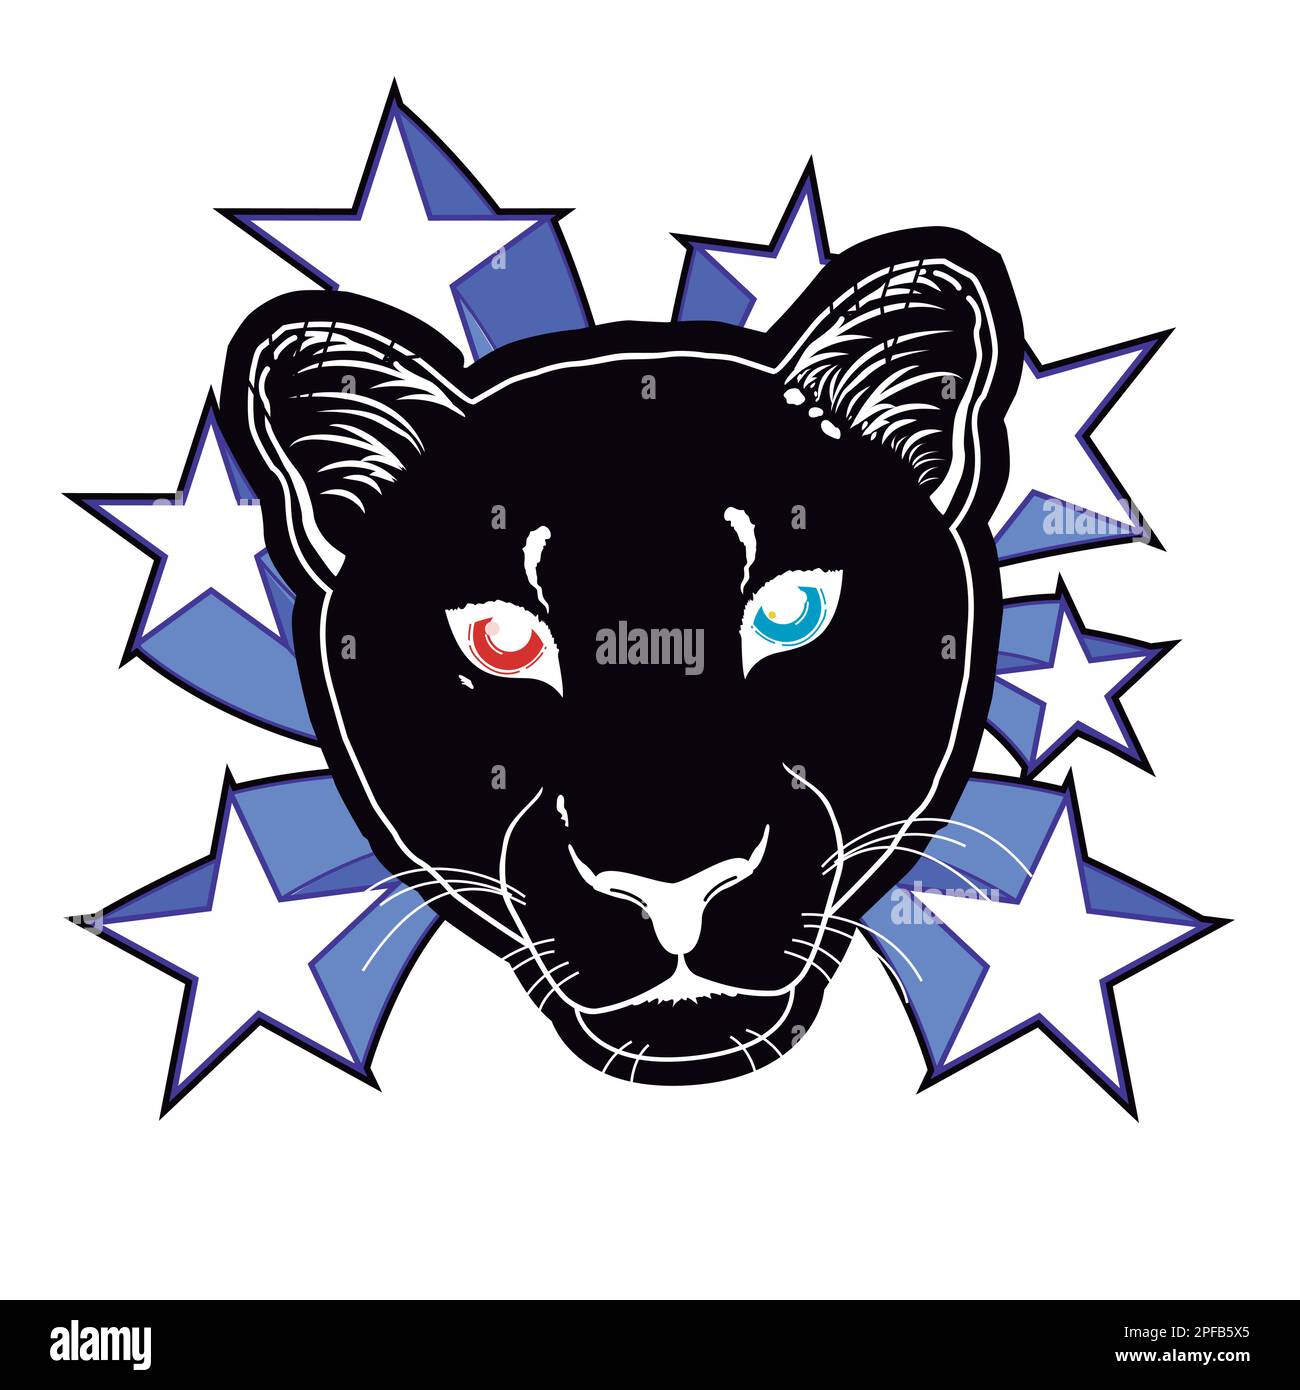 t-shirt design of a black panther face surrounded by stars.vector illustration for afro history month Stock Vector